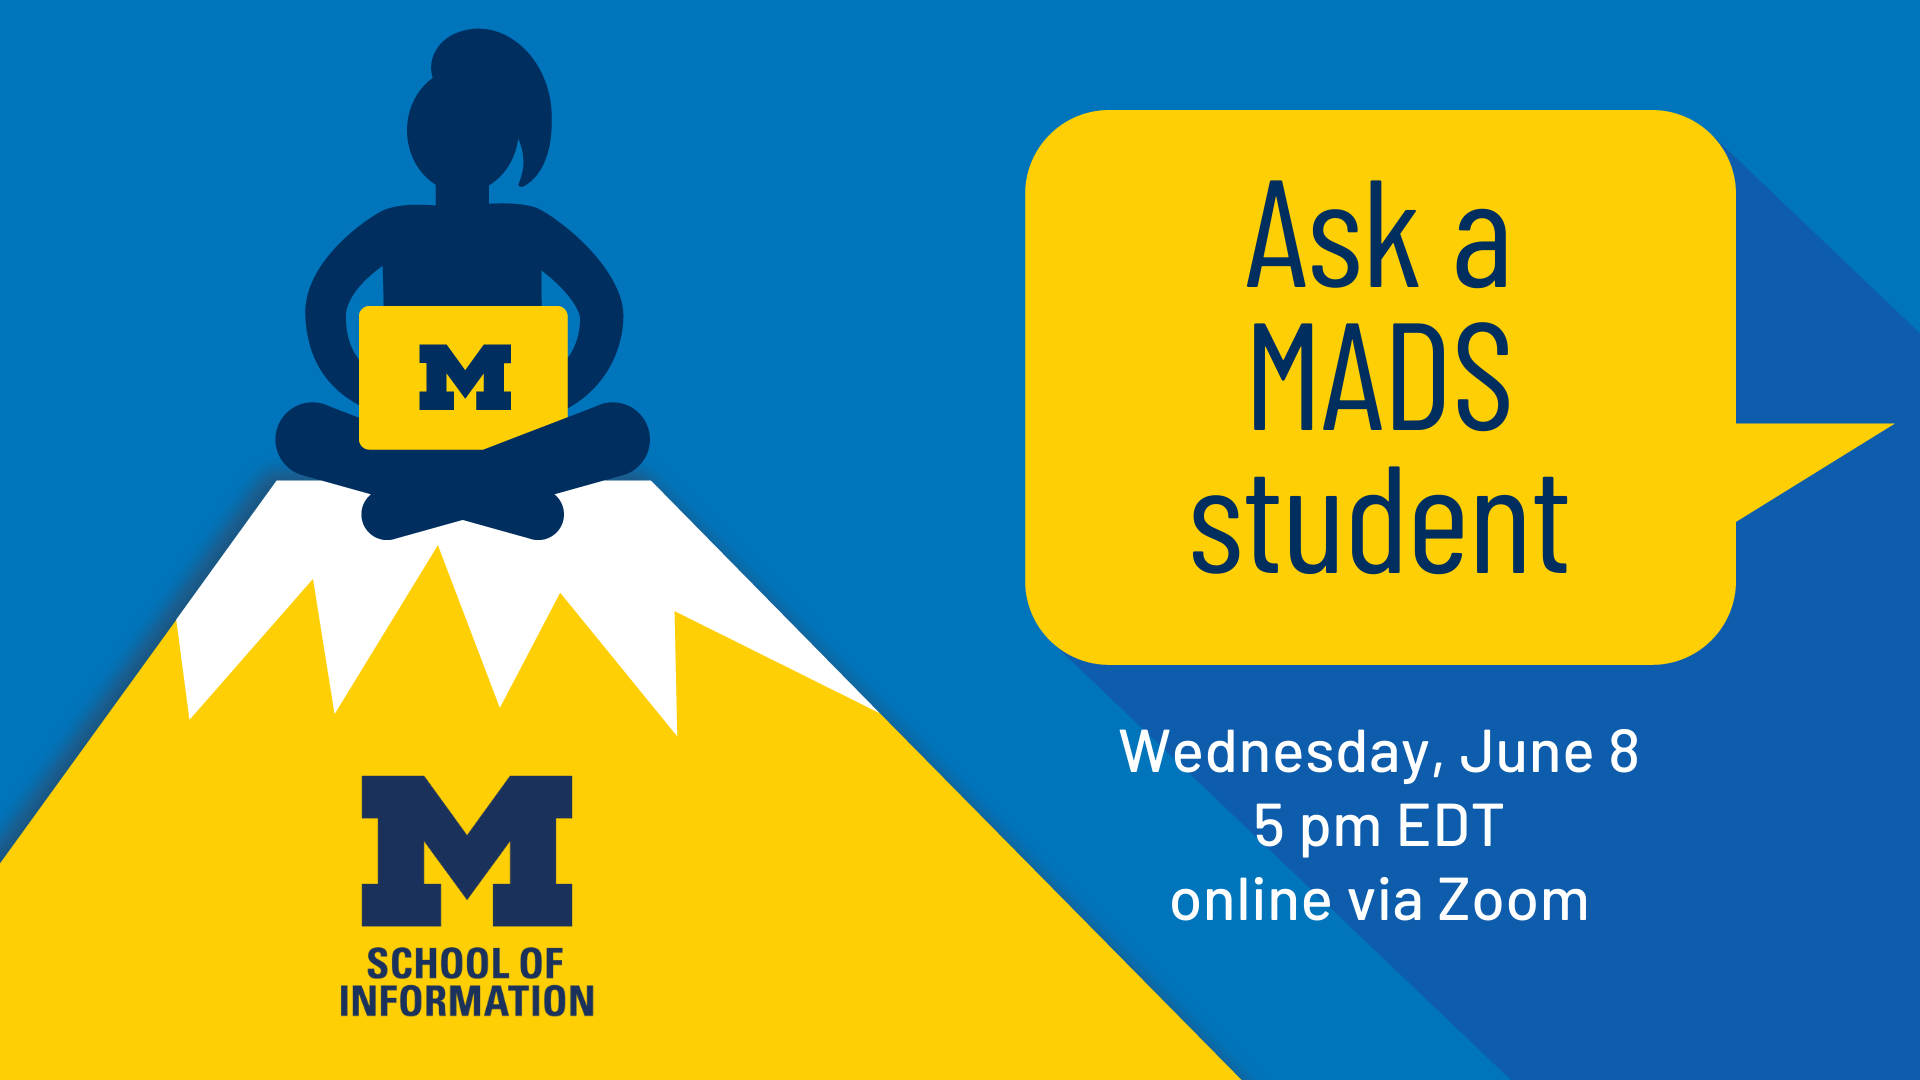 “Ask a MADS student. Wednesday, June 8. 5 pm EDT. Online via Zoom.”